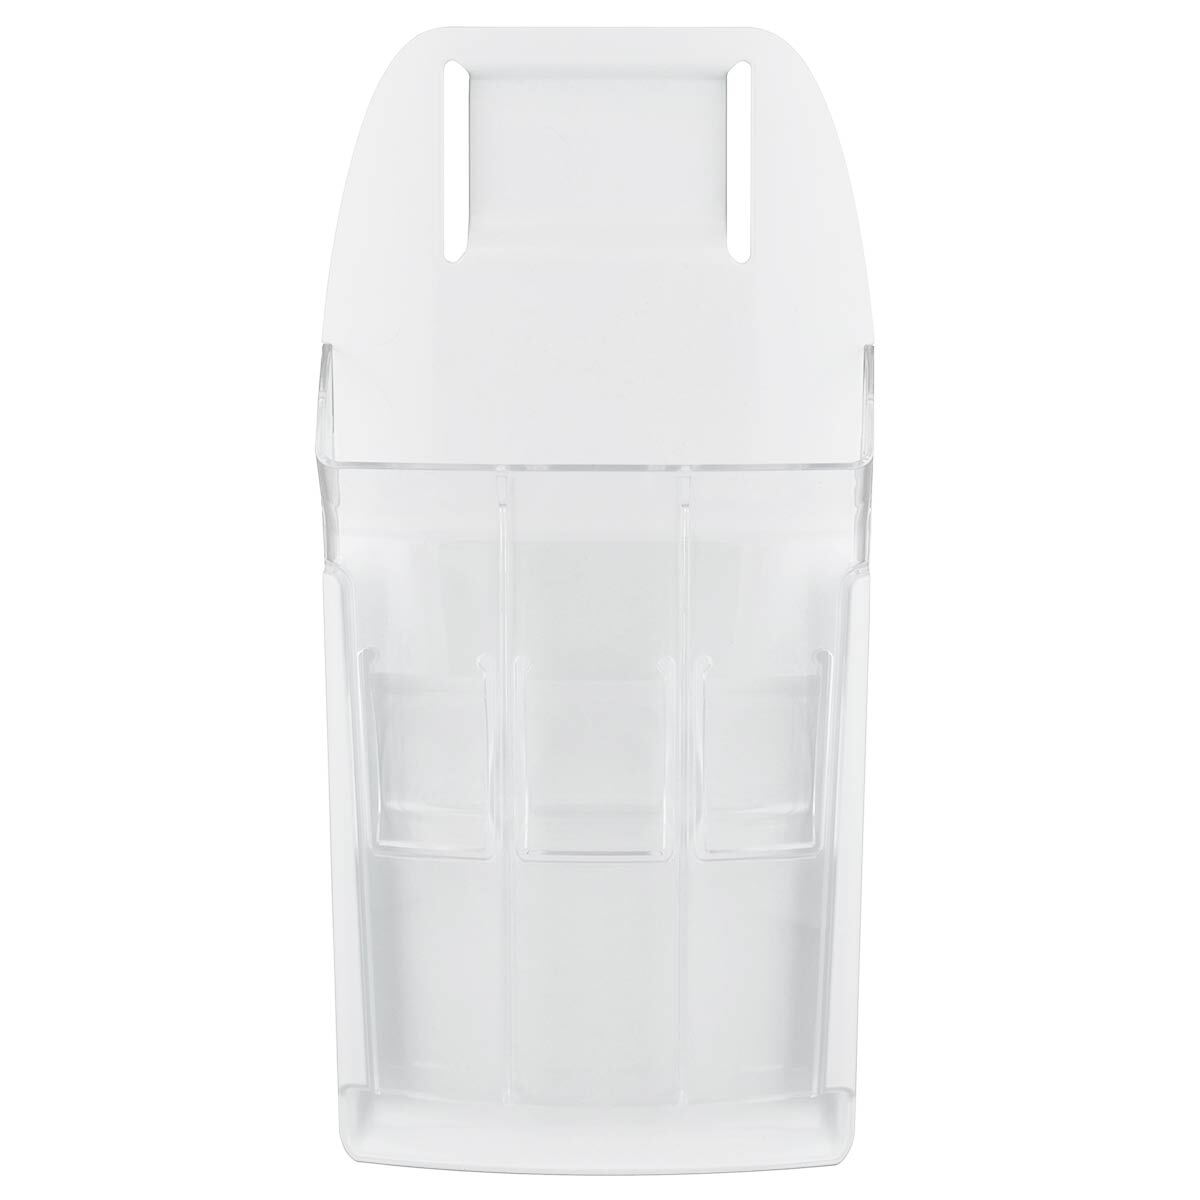 Knife Pouch, 3 Holder, Clear Front